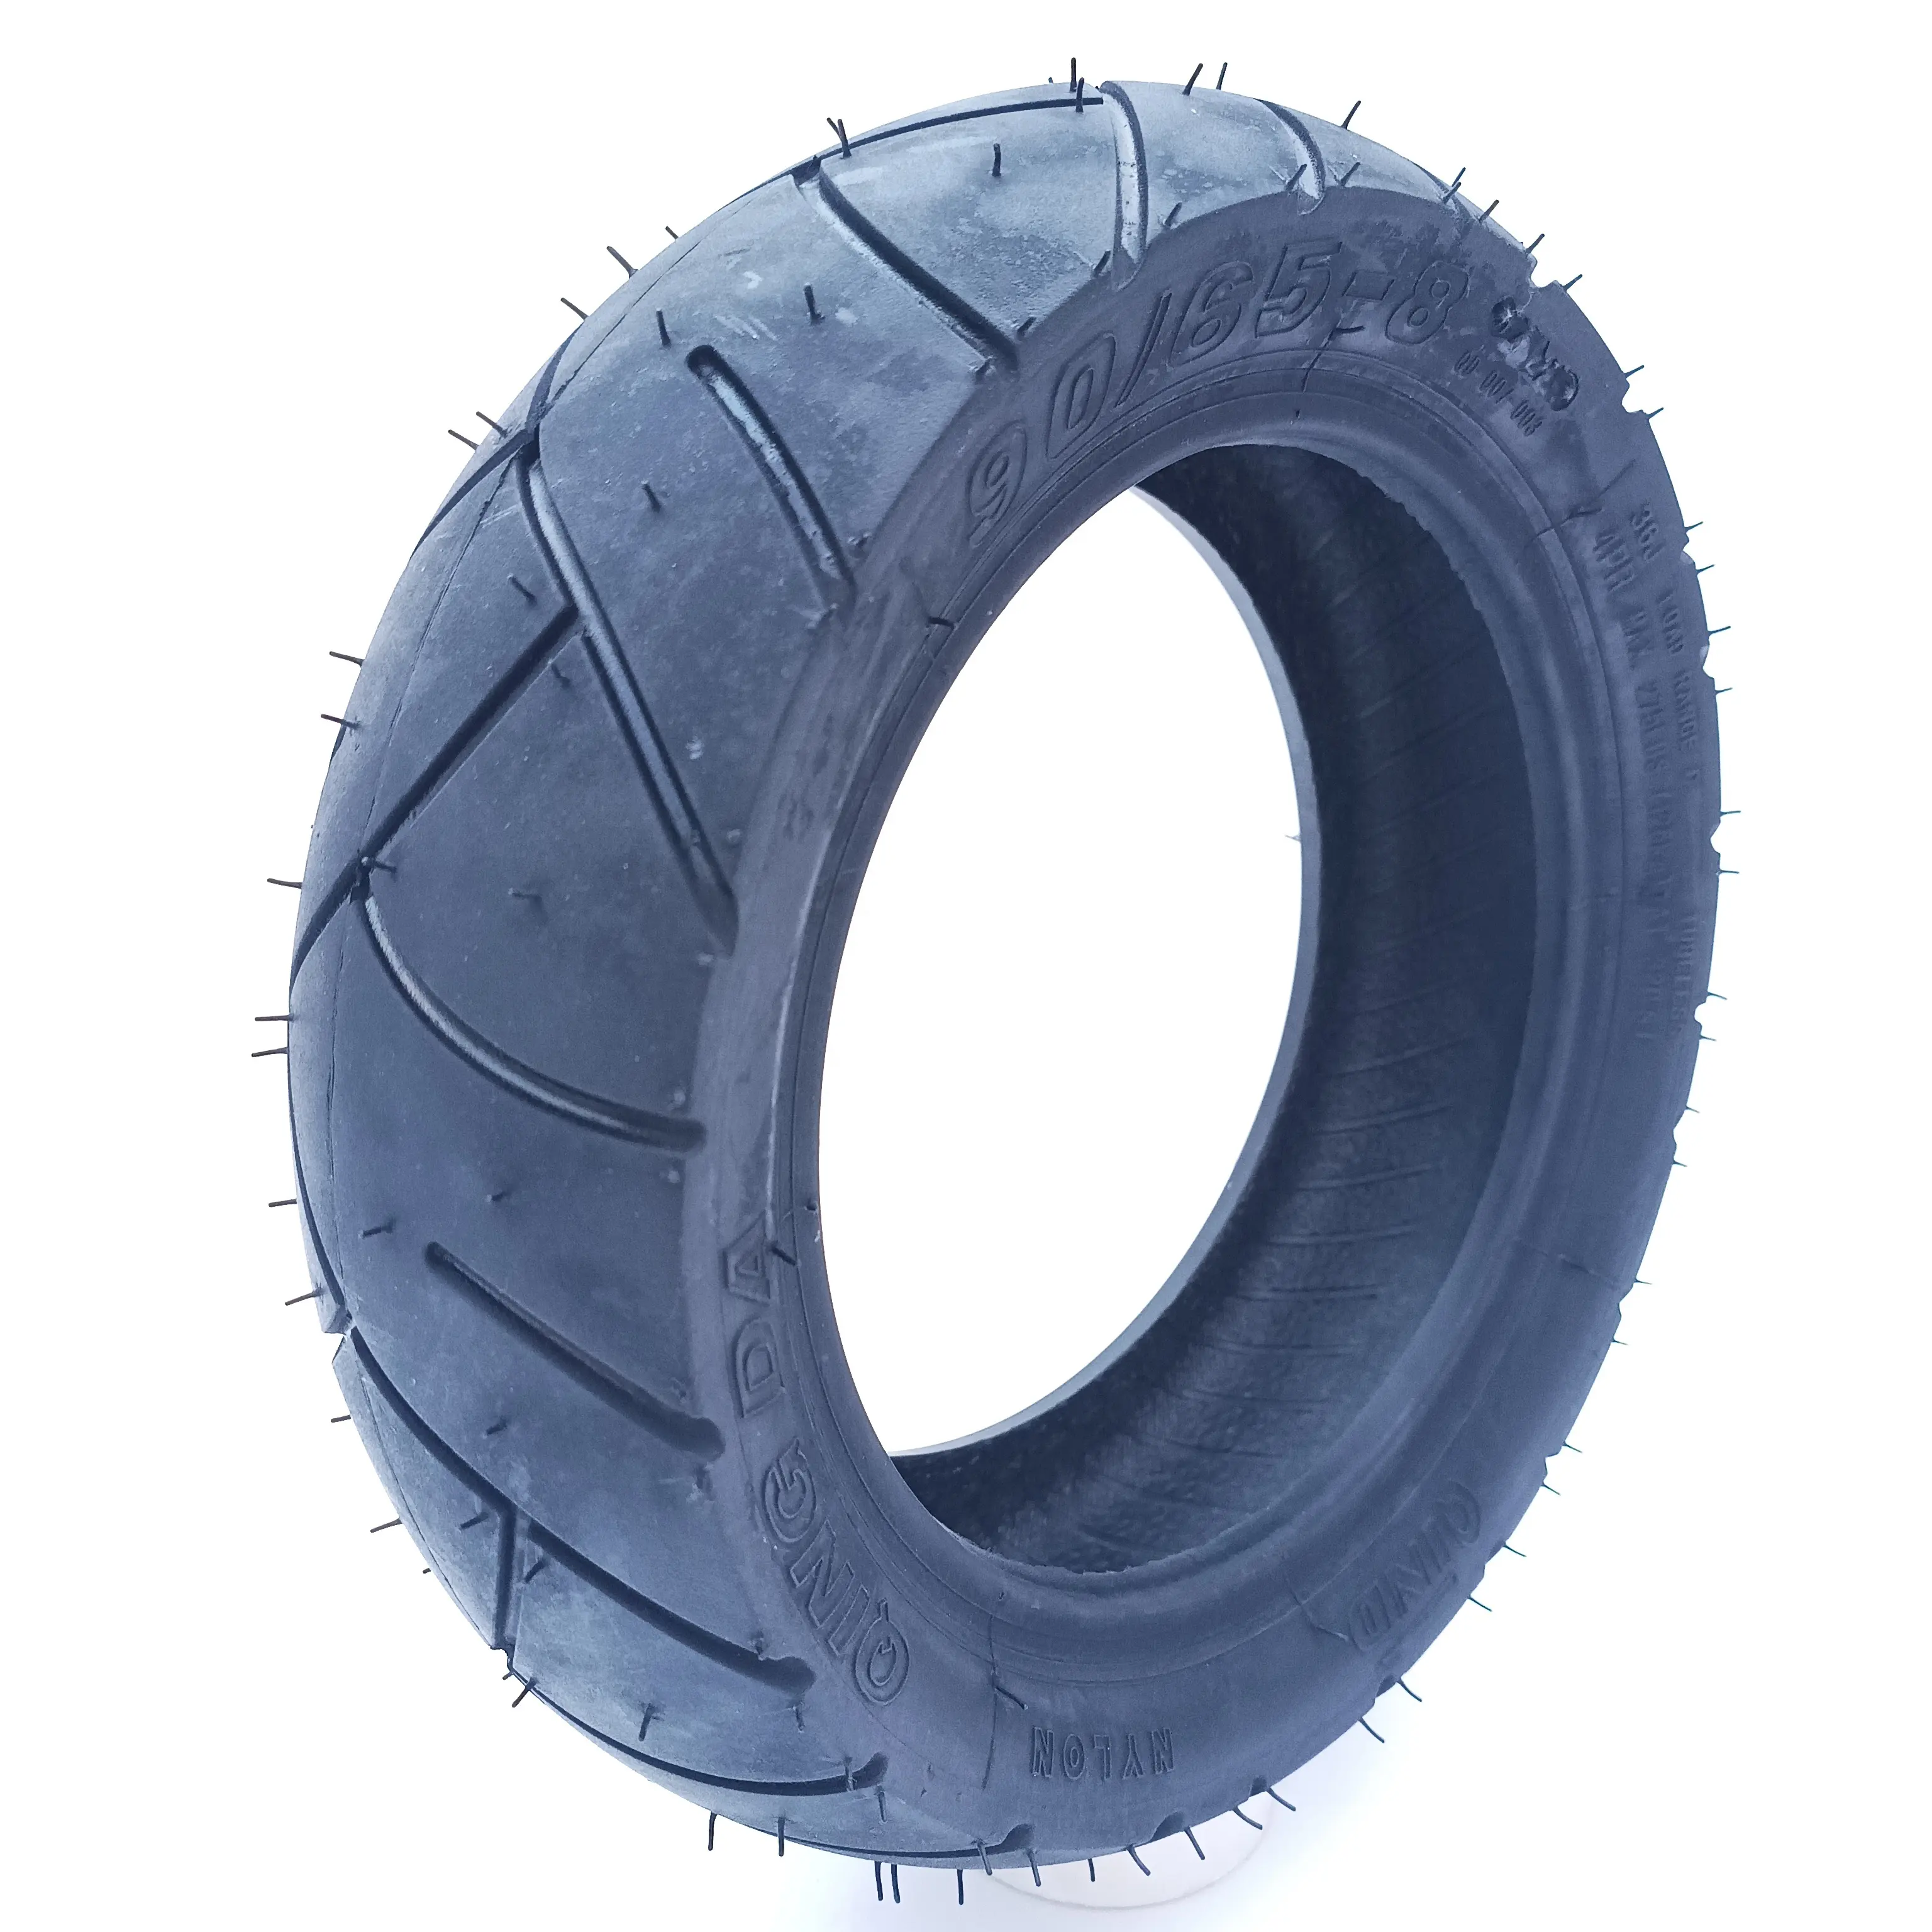 Professional wholesale high quality scooter tires Monkey motorcycle retrofit tyres 90/65-8 tubeless tire